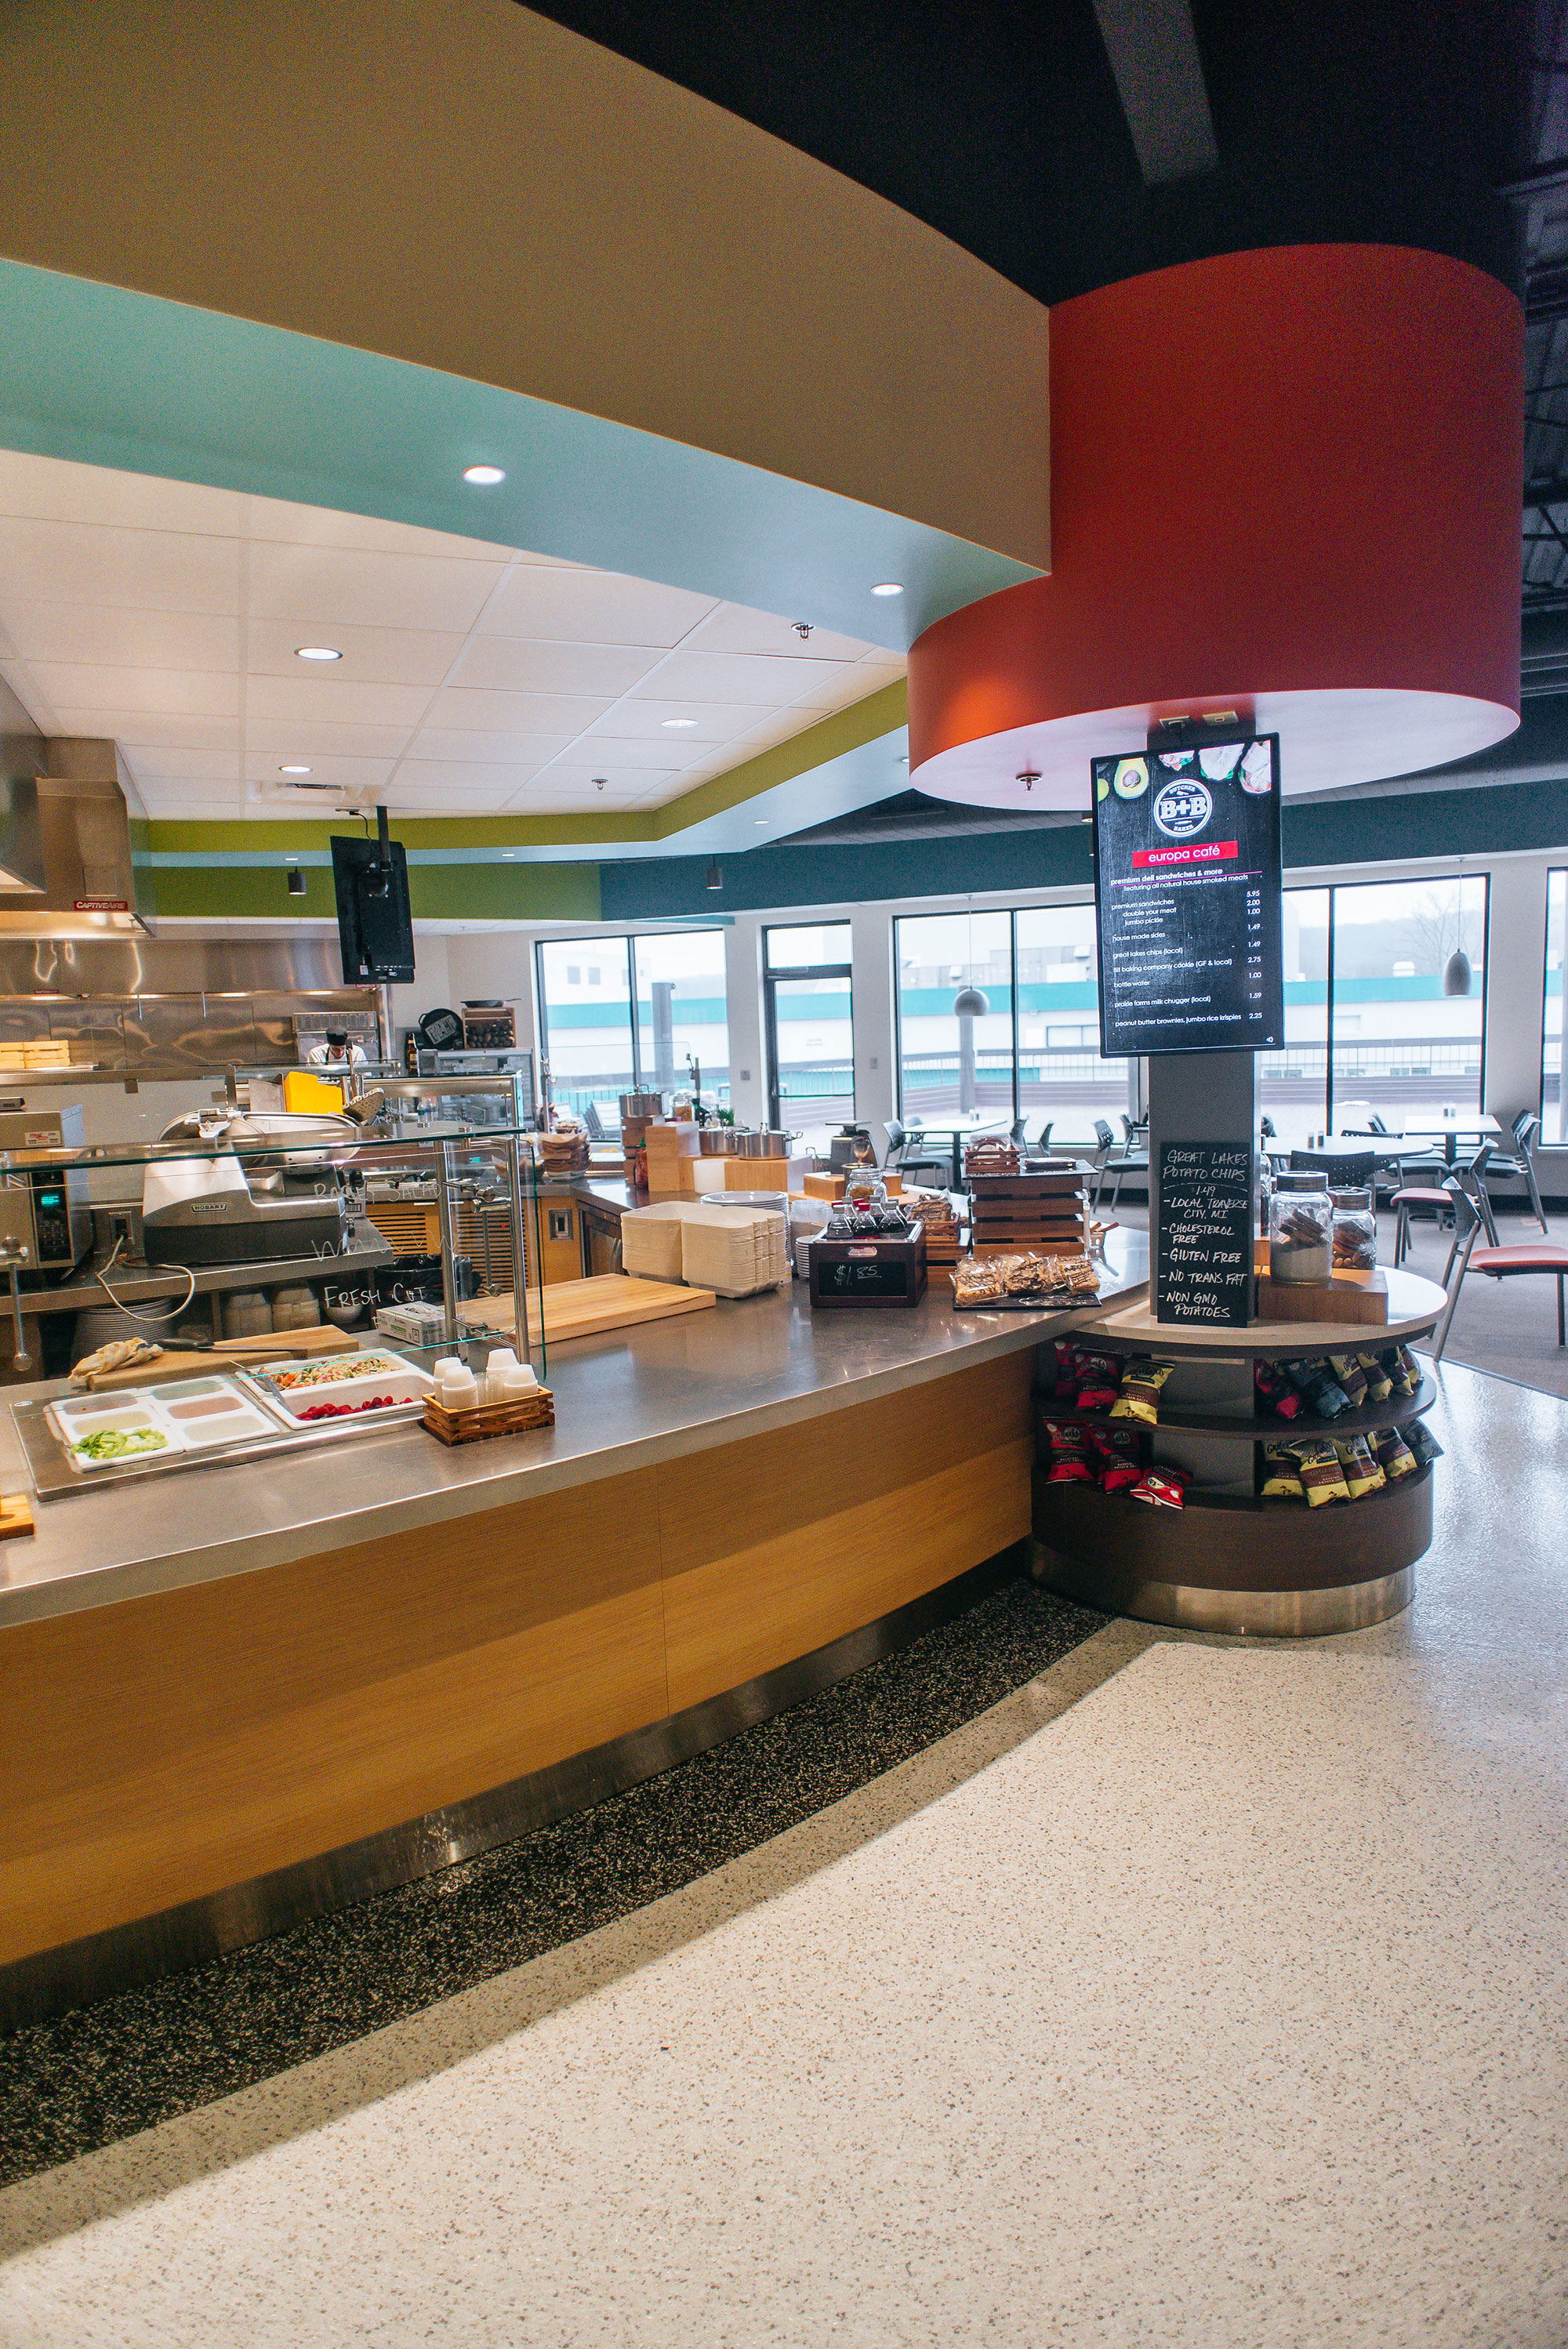 Commercial Kitchen University Dining Area Self Service Bar